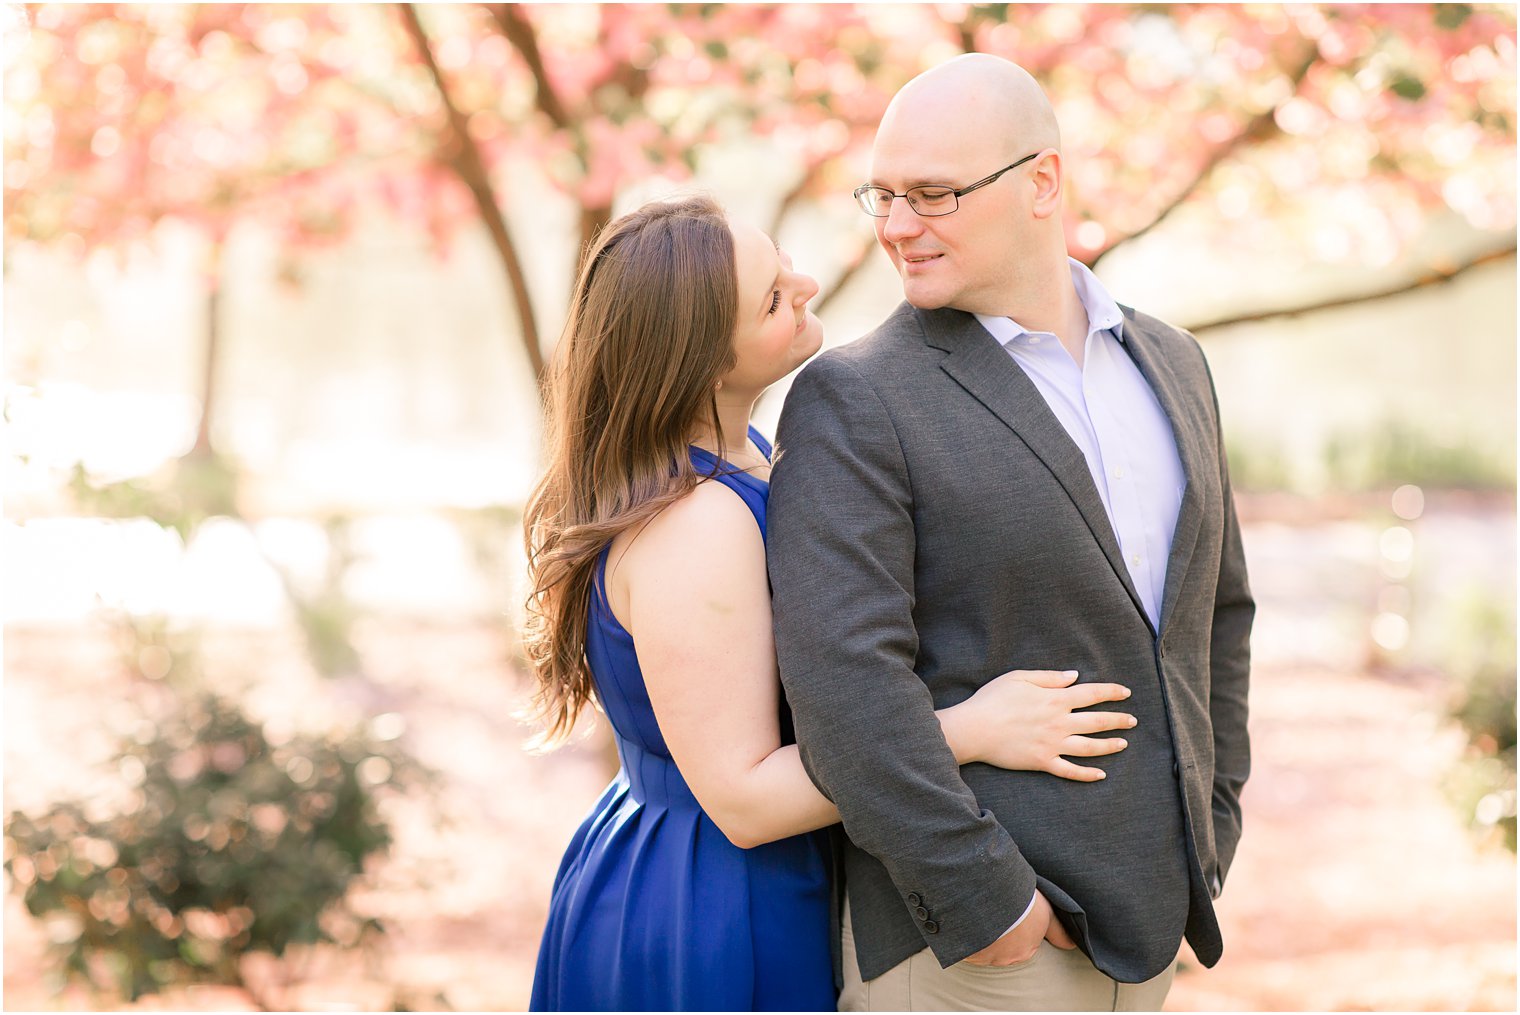 Engagement photos at Branch Brook Park for young couple